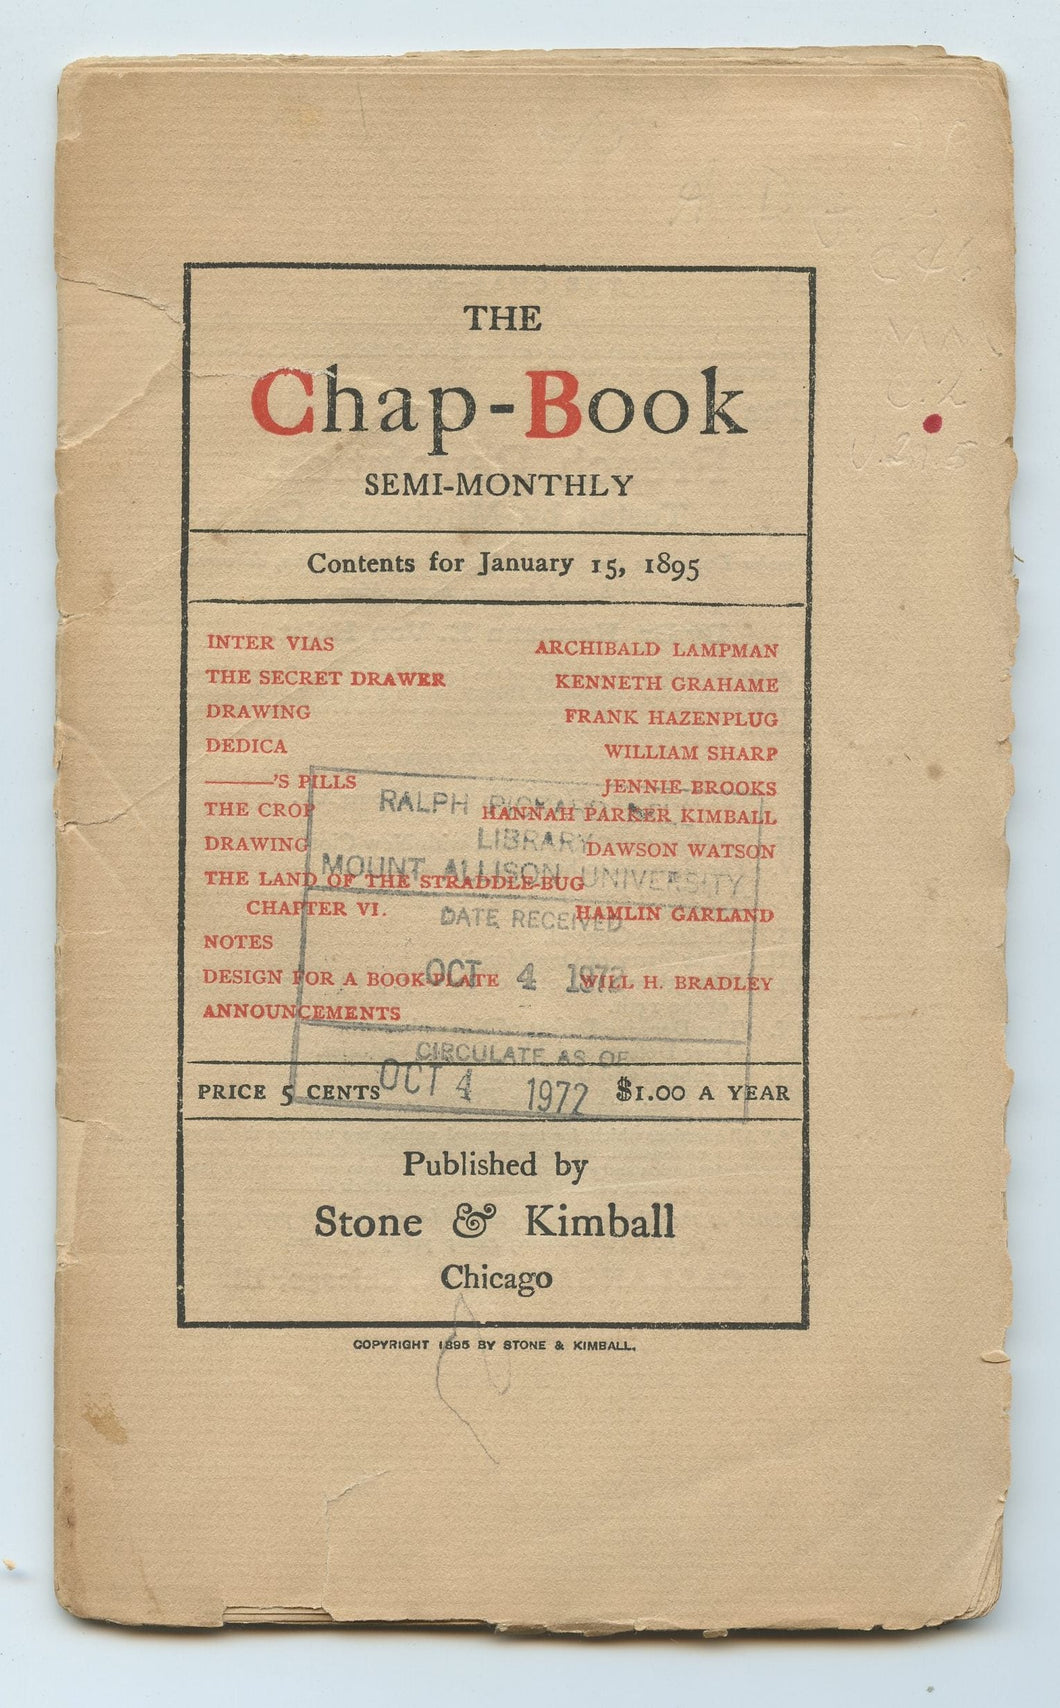 The Chap-Book, January 15, 1895